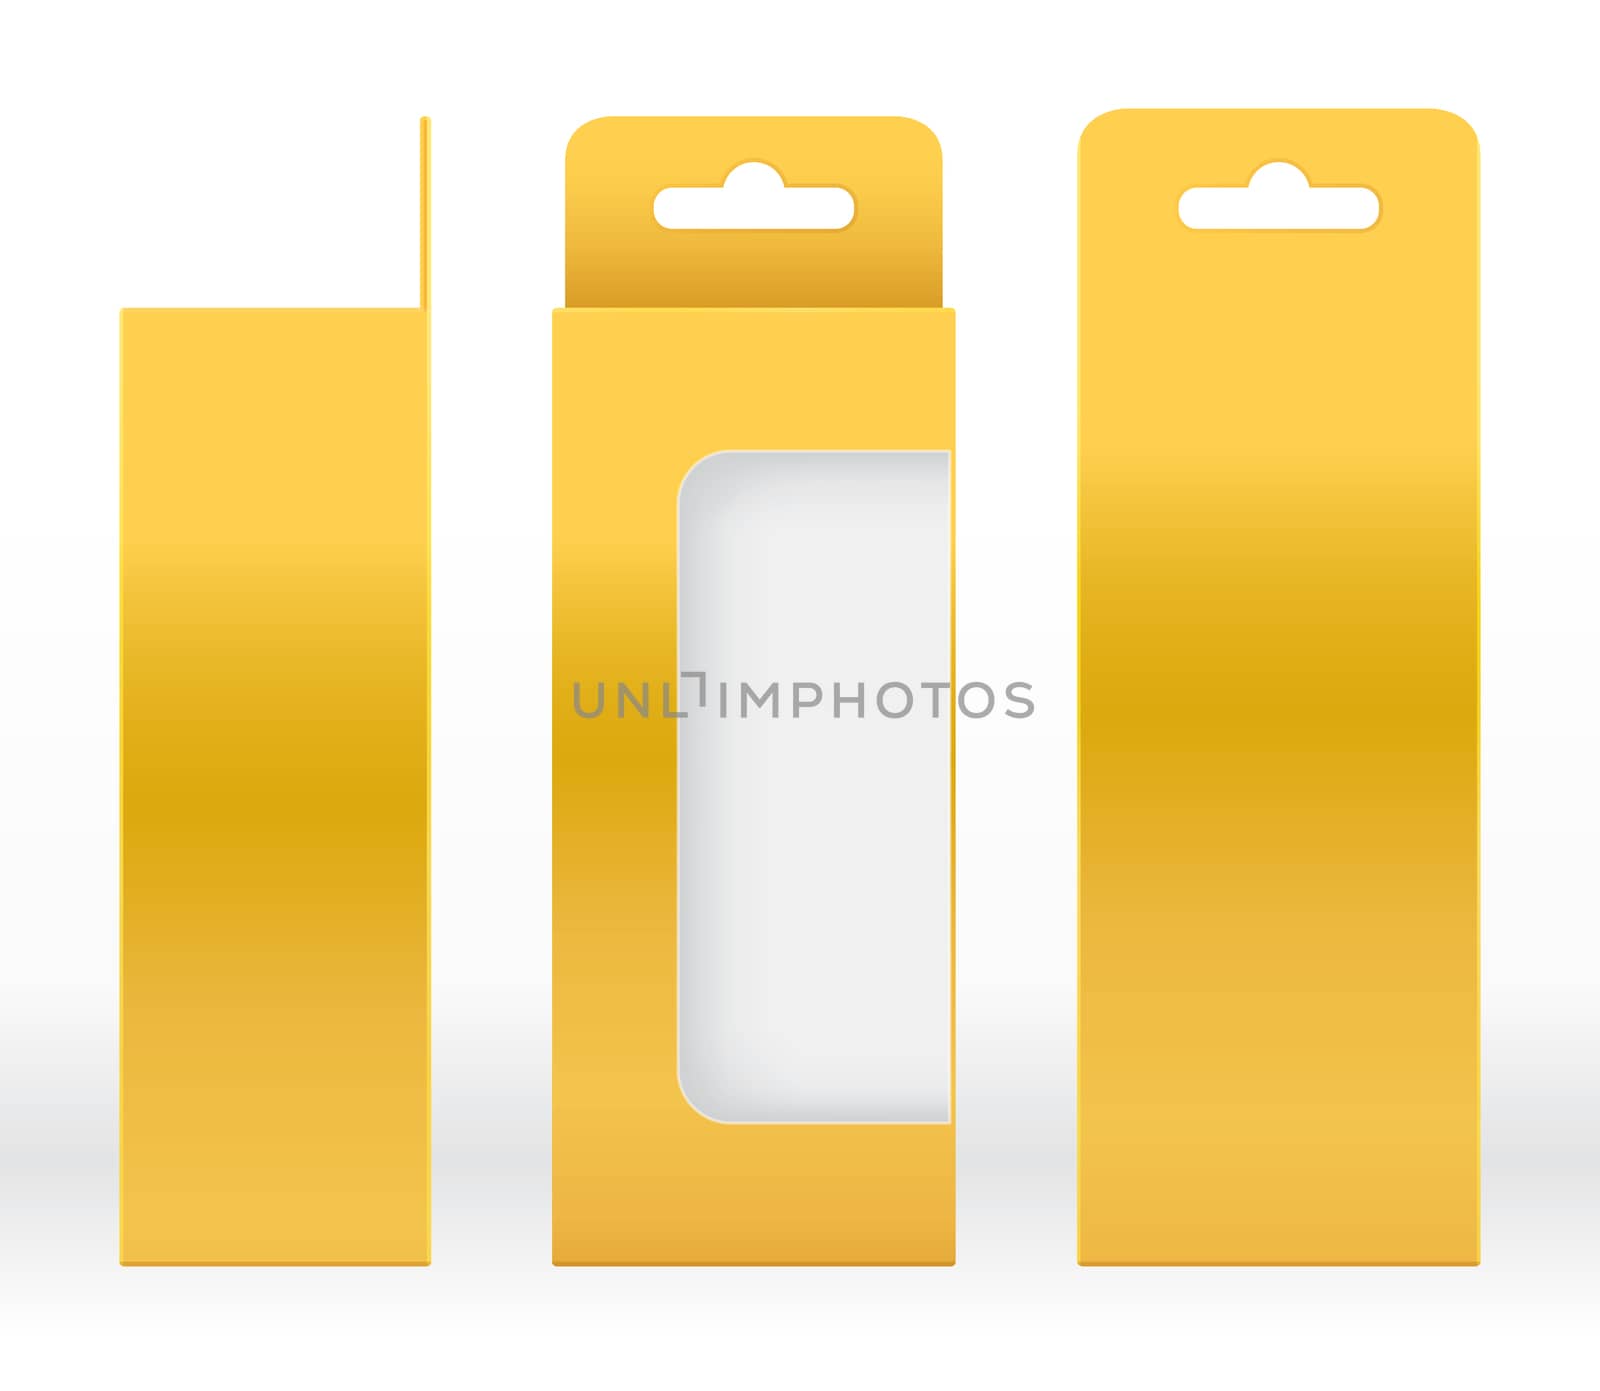 Hanging Box Gold window shape cut out Packaging Template blank. Luxury Empty Box Golden yellow Template for design product package gift box, Yellow Gold Box packaging paper kraft cardboard package by cgdeaw